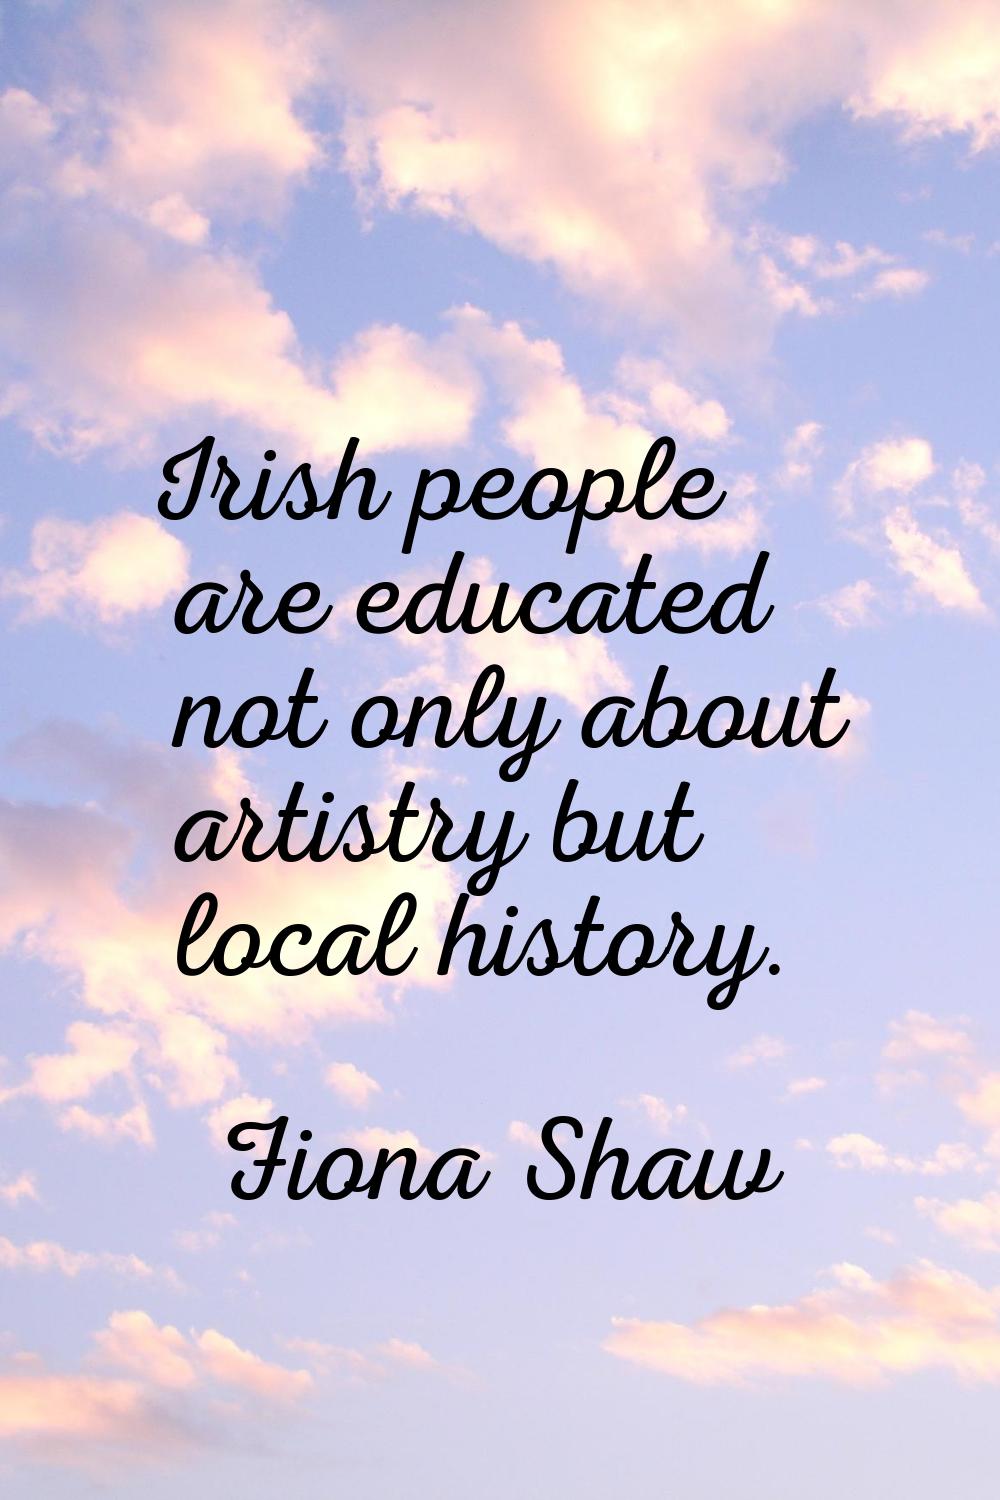 Irish people are educated not only about artistry but local history.